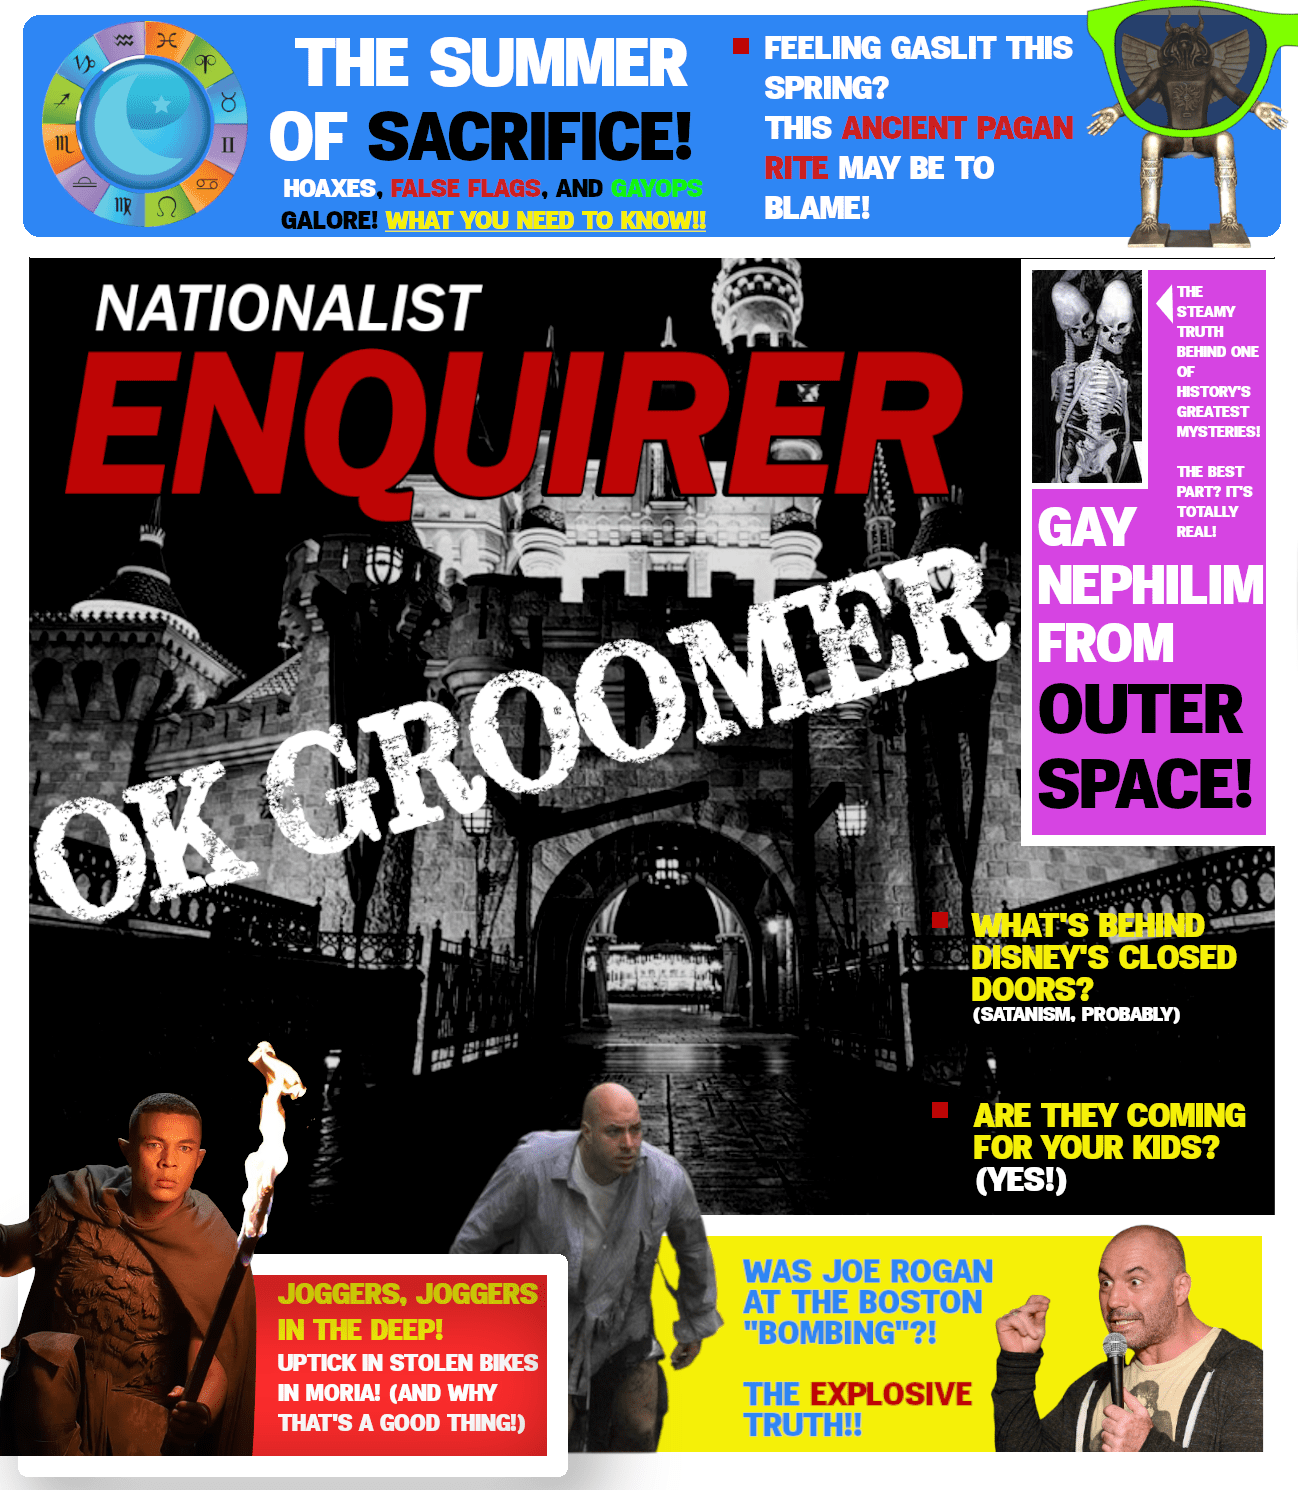 THE NATIONALIST ENQUIRER: AN AMAZING ARRAY OF SUBHUMANS